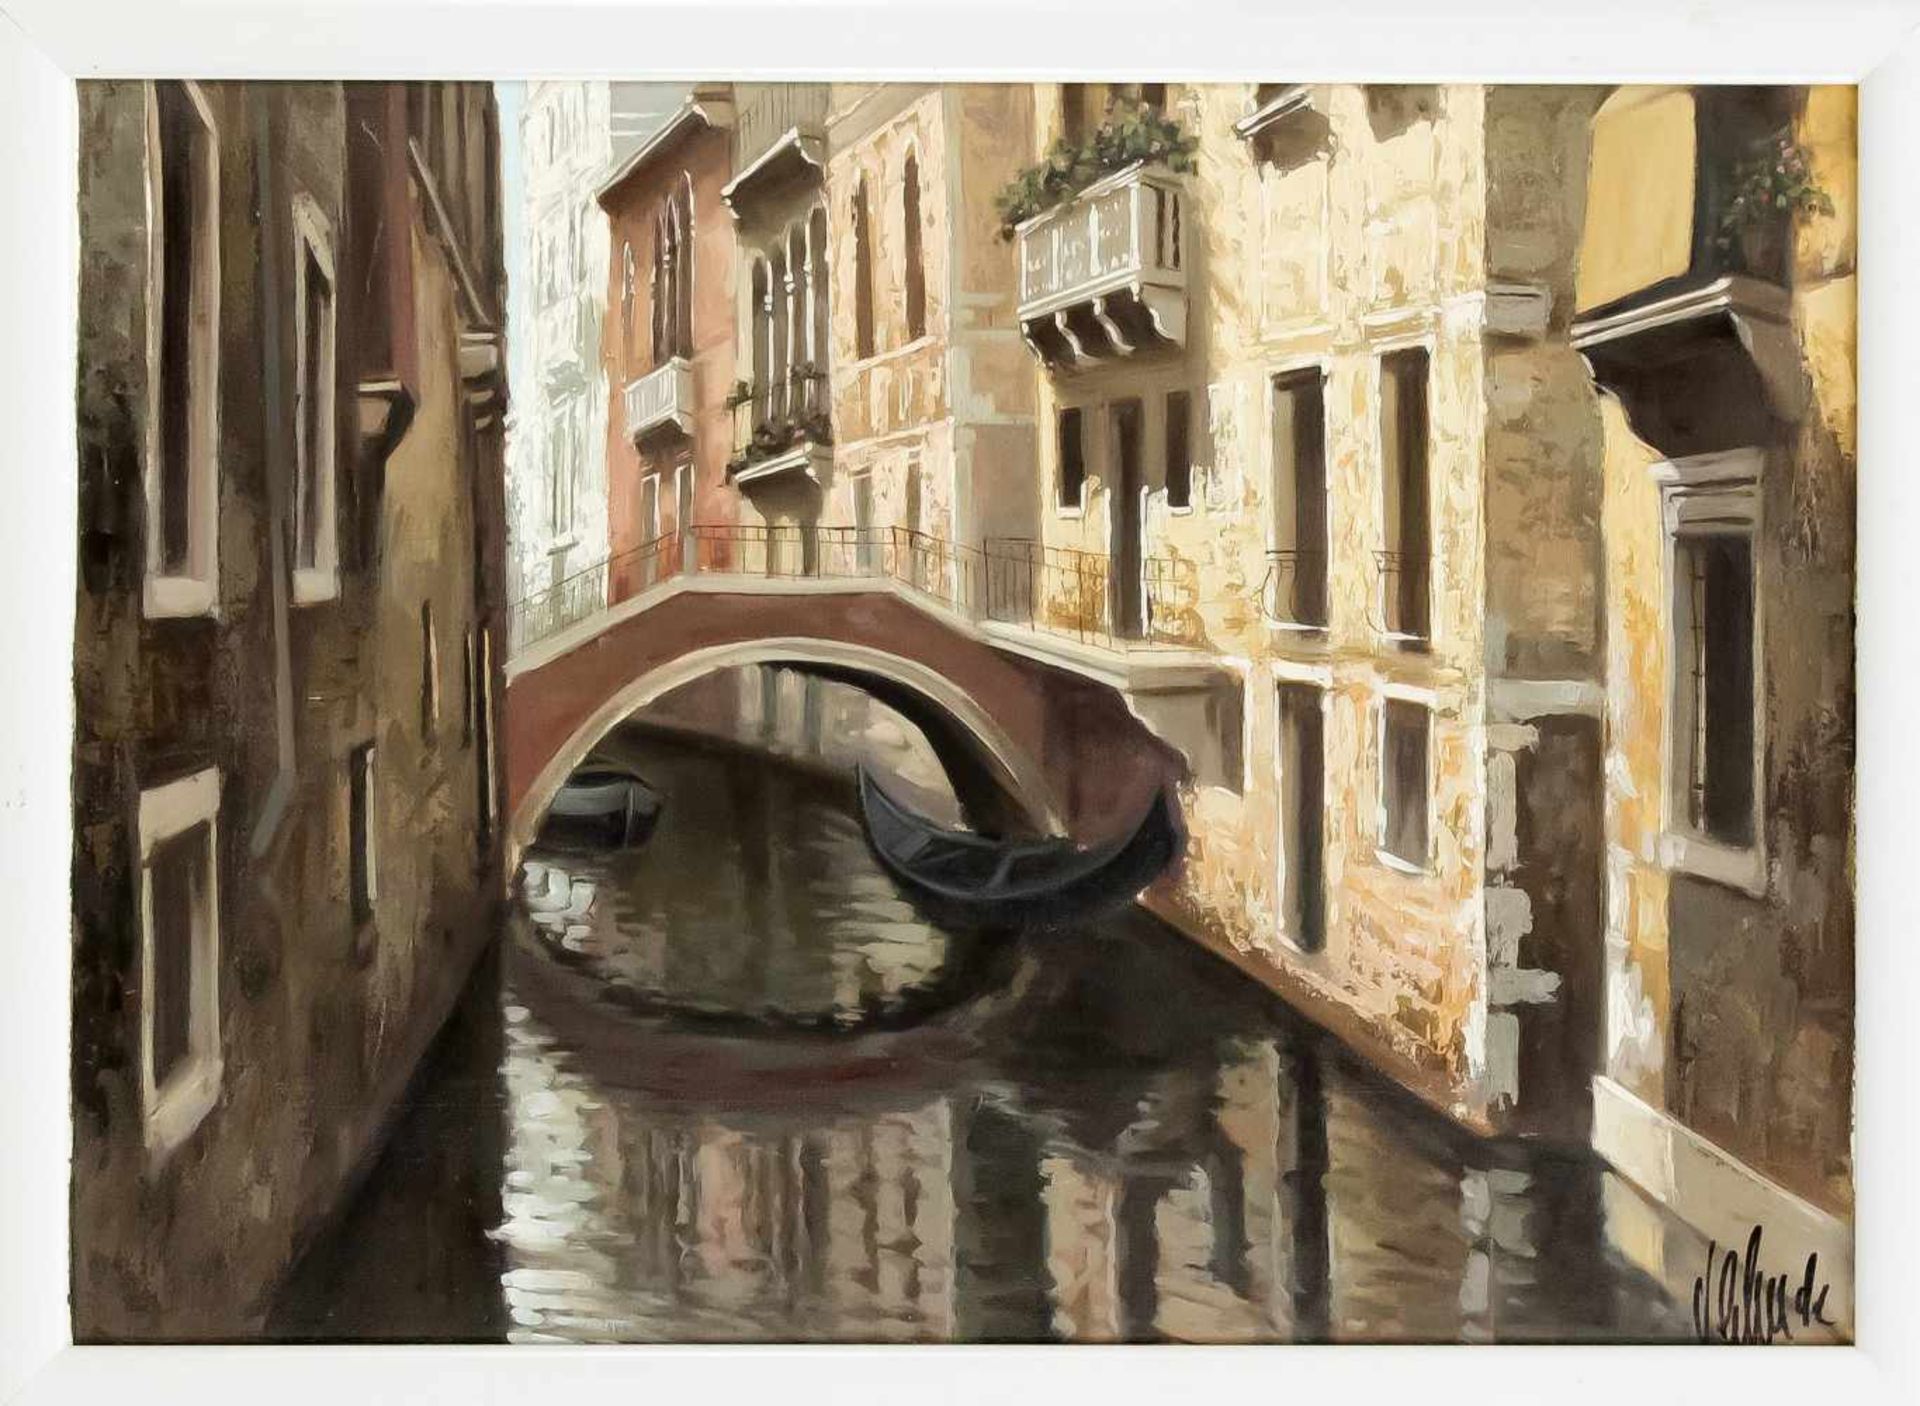 Popov, Russian painter 2nd half of the 20th century, naturalistic view of a canal inVenice, oil on